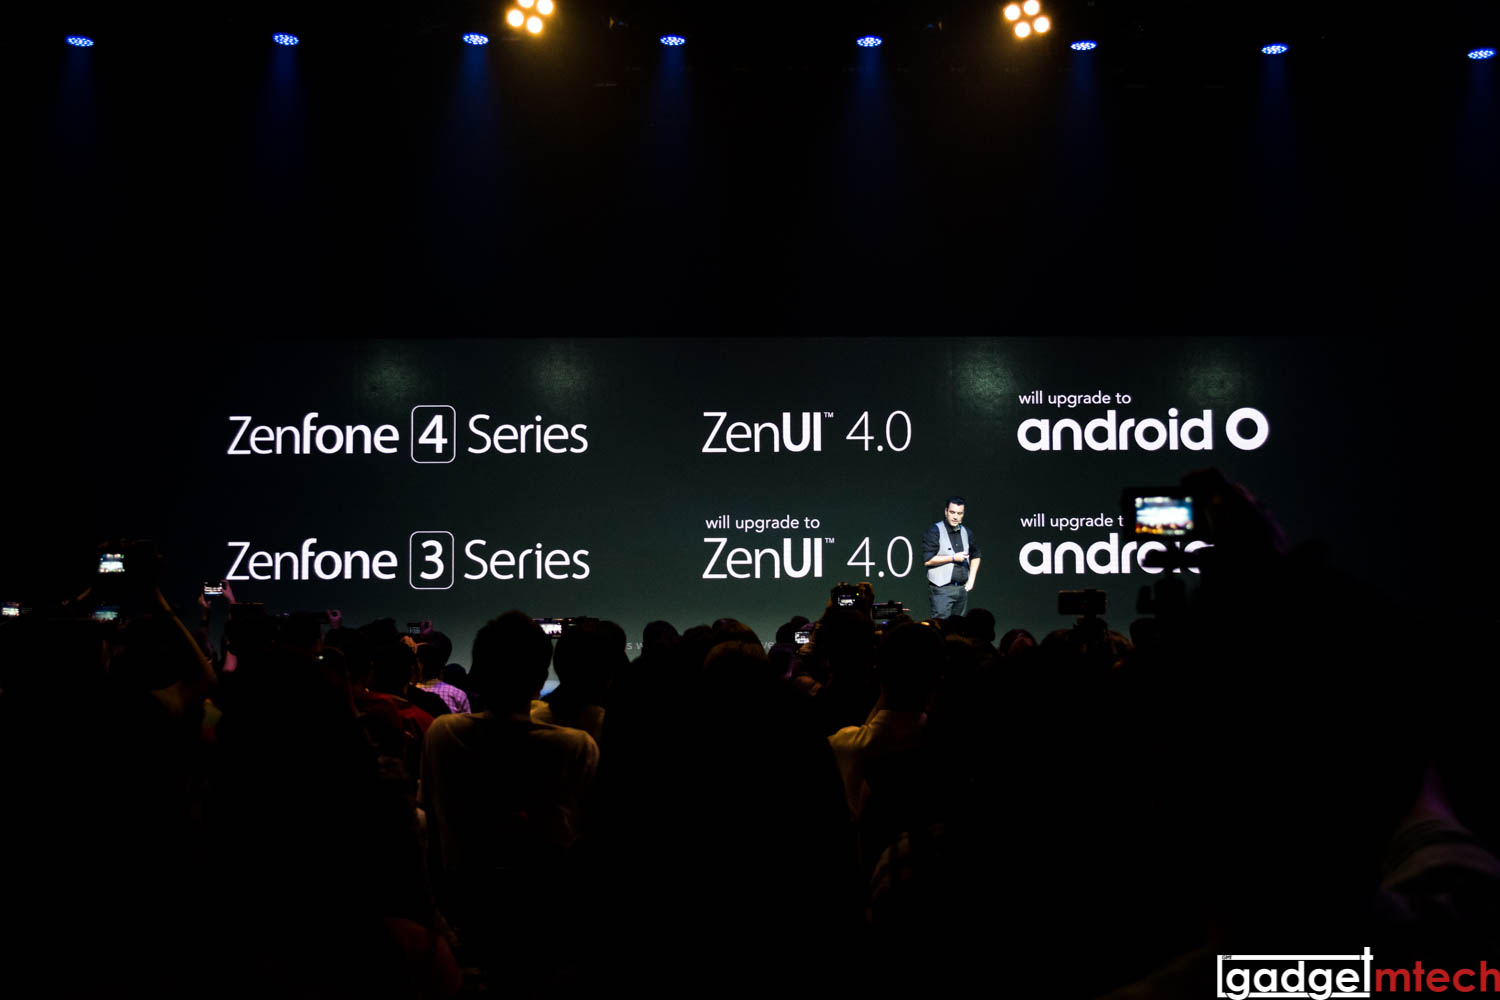 ASUS ZenFone 4 Series and ZenFone 3 Series Will Receive Android O Update